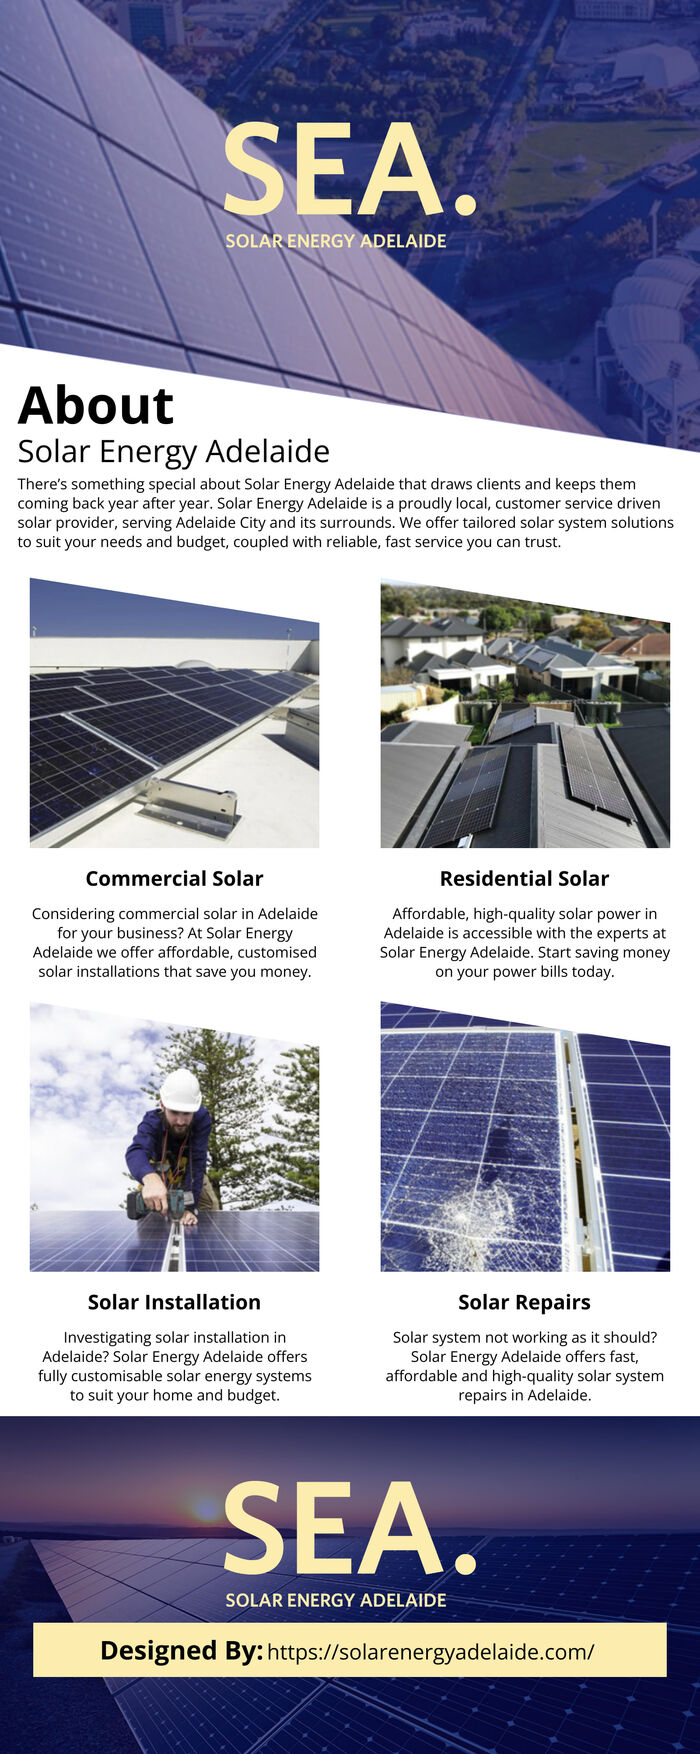 This infographic is designed by Solar Power Adelaide